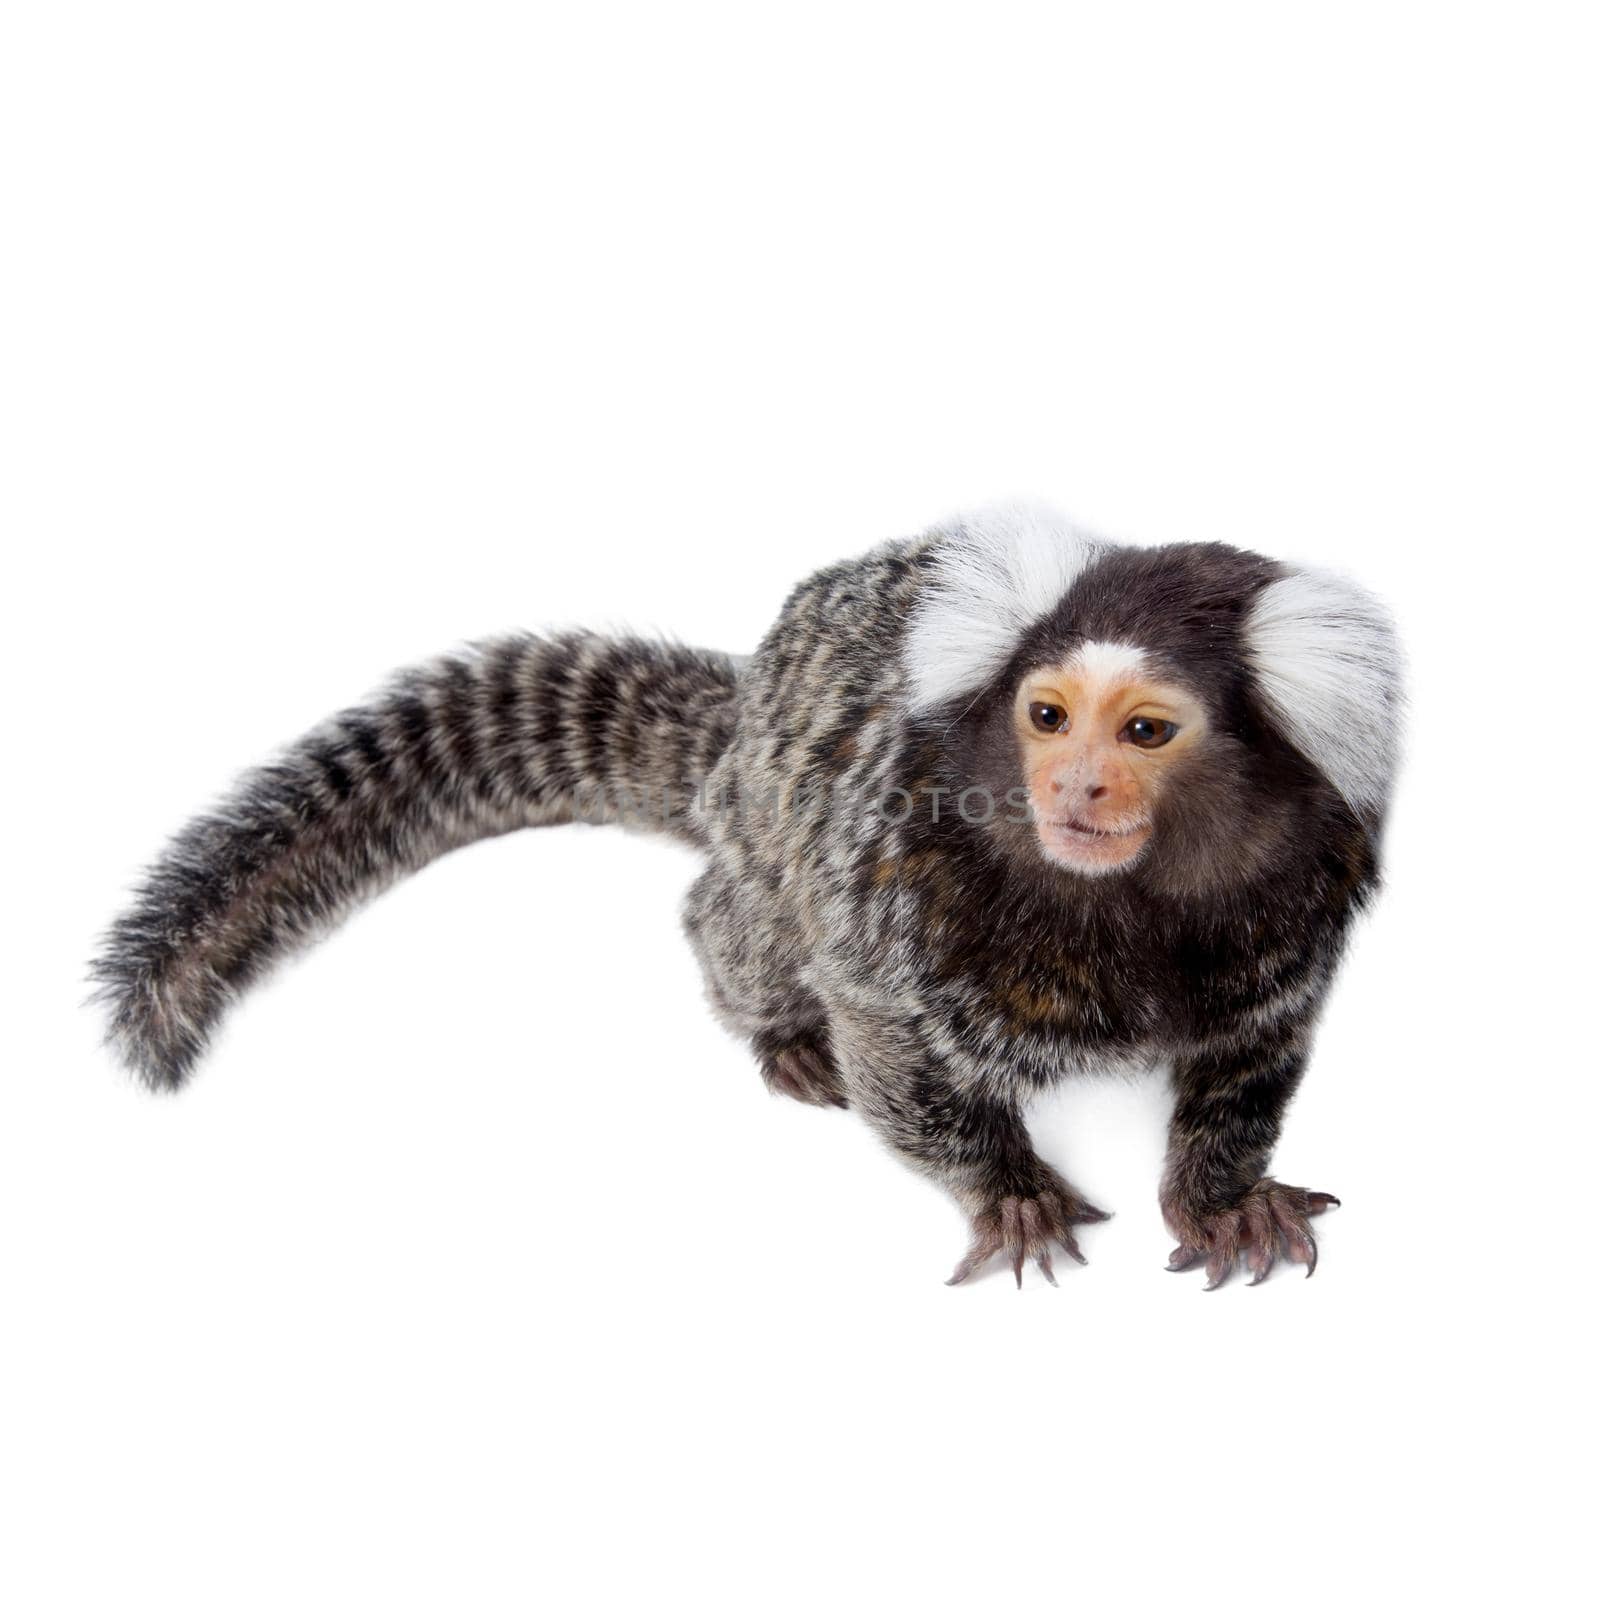 The common marmoset on white by RosaJay